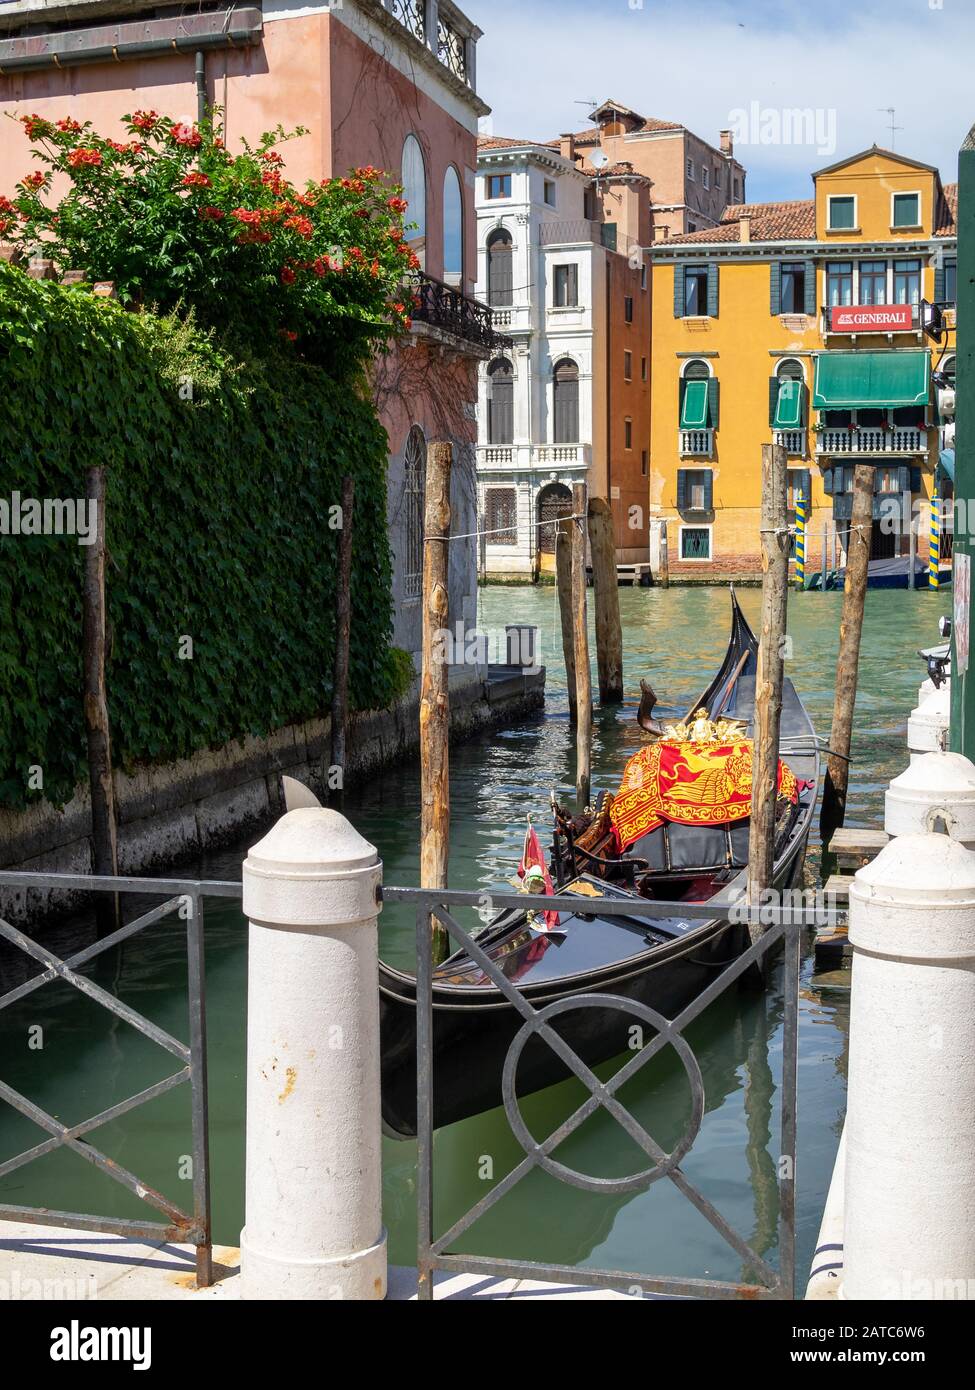 Gondola docked in a small canal in Venice Stock Photo